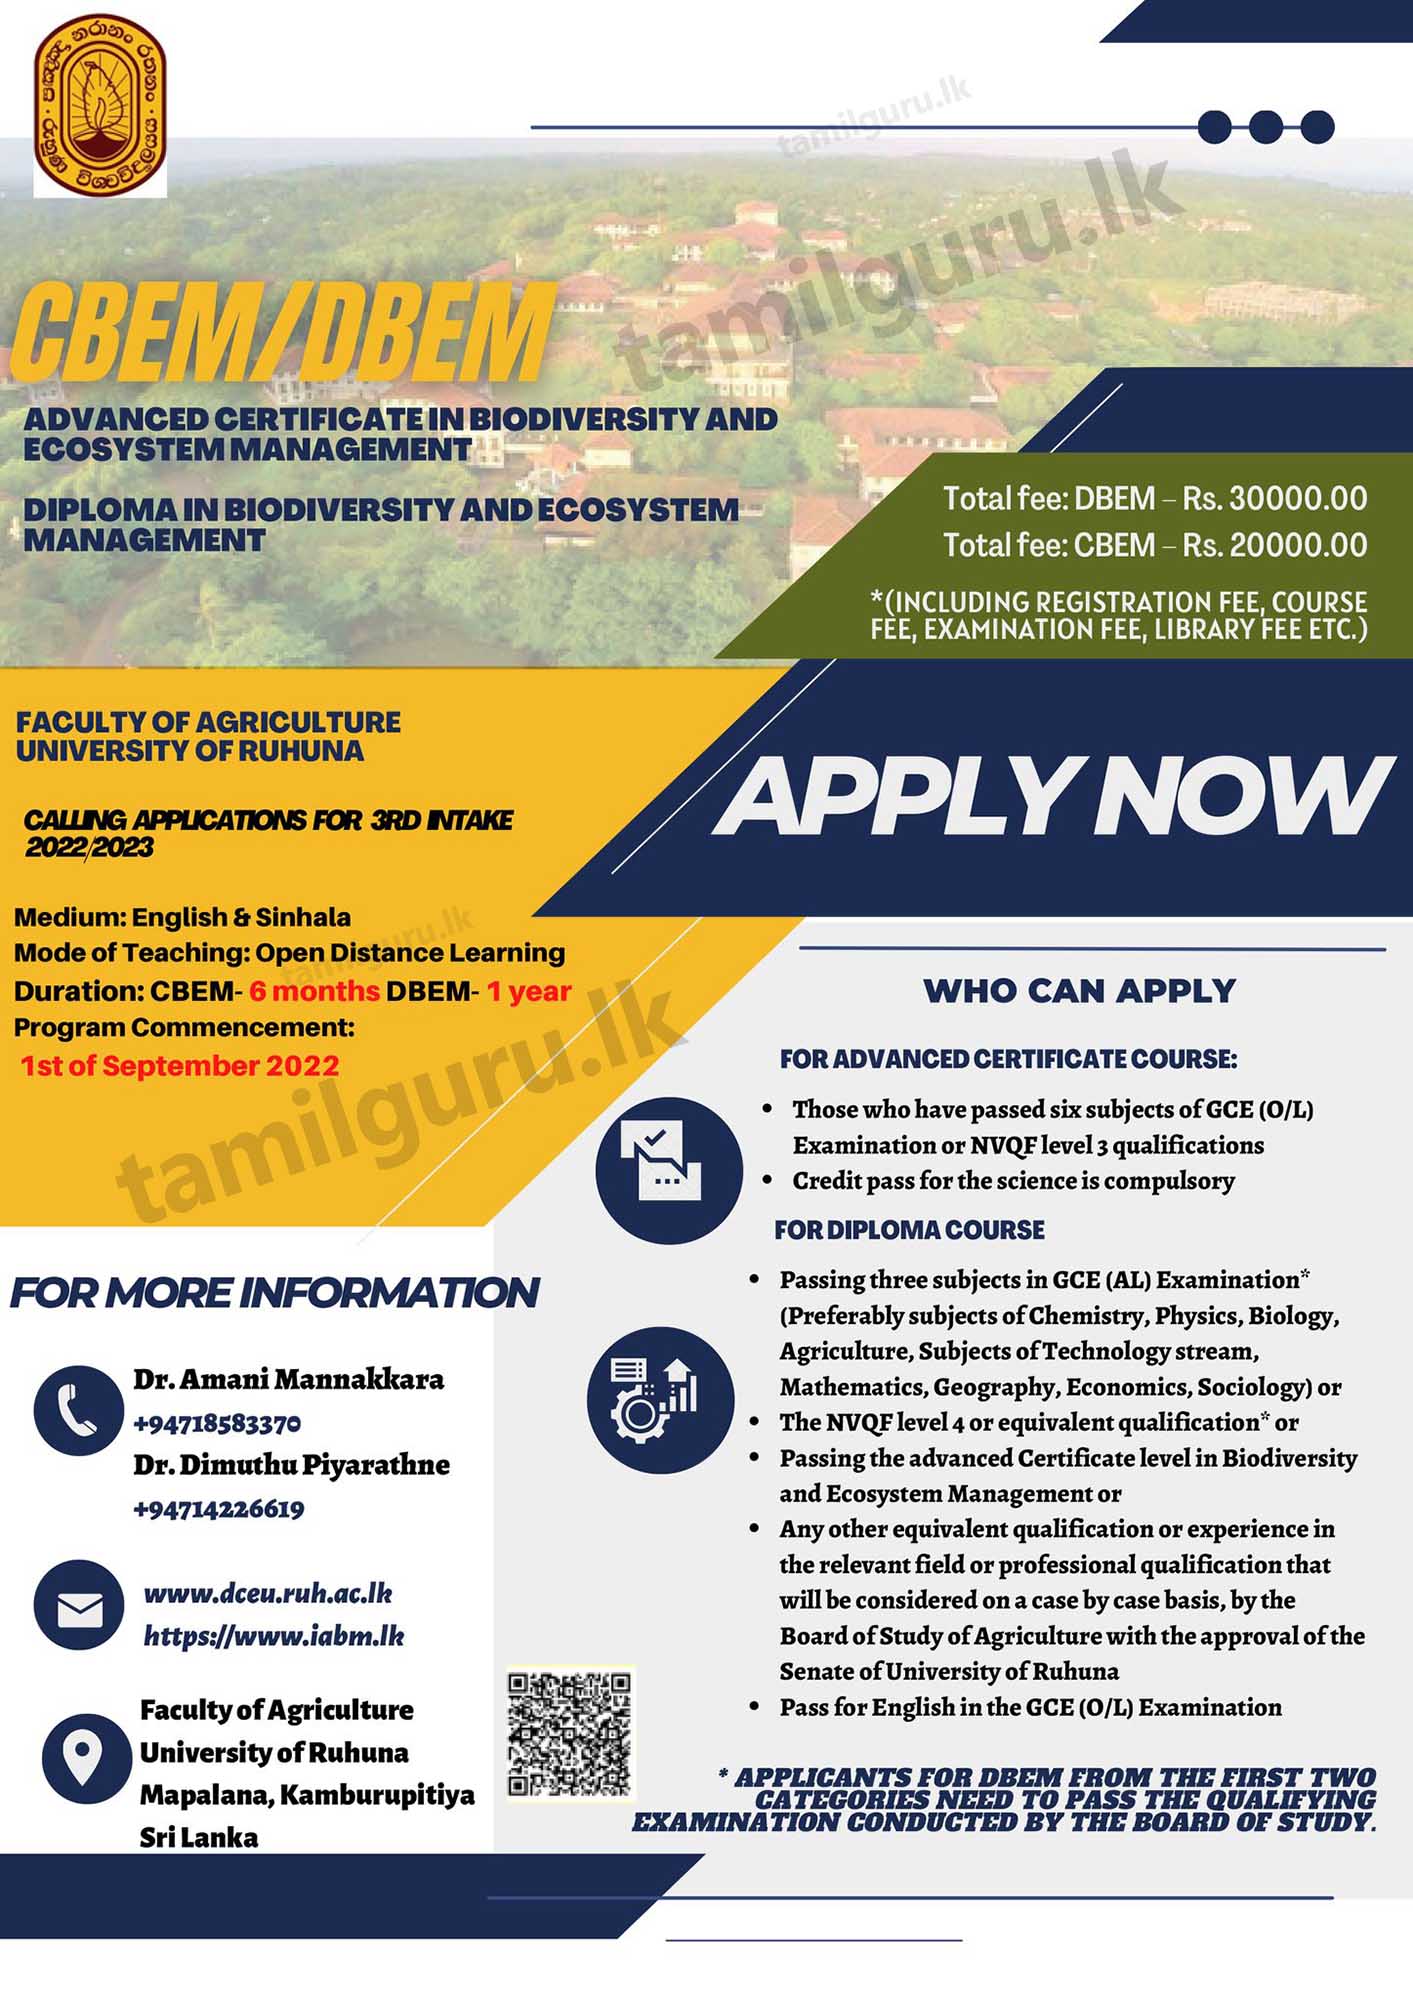 Advanced Certificate & Diploma in Biodiversity and Ecosystem Management (BEM) 2022 - University of Ruhuna